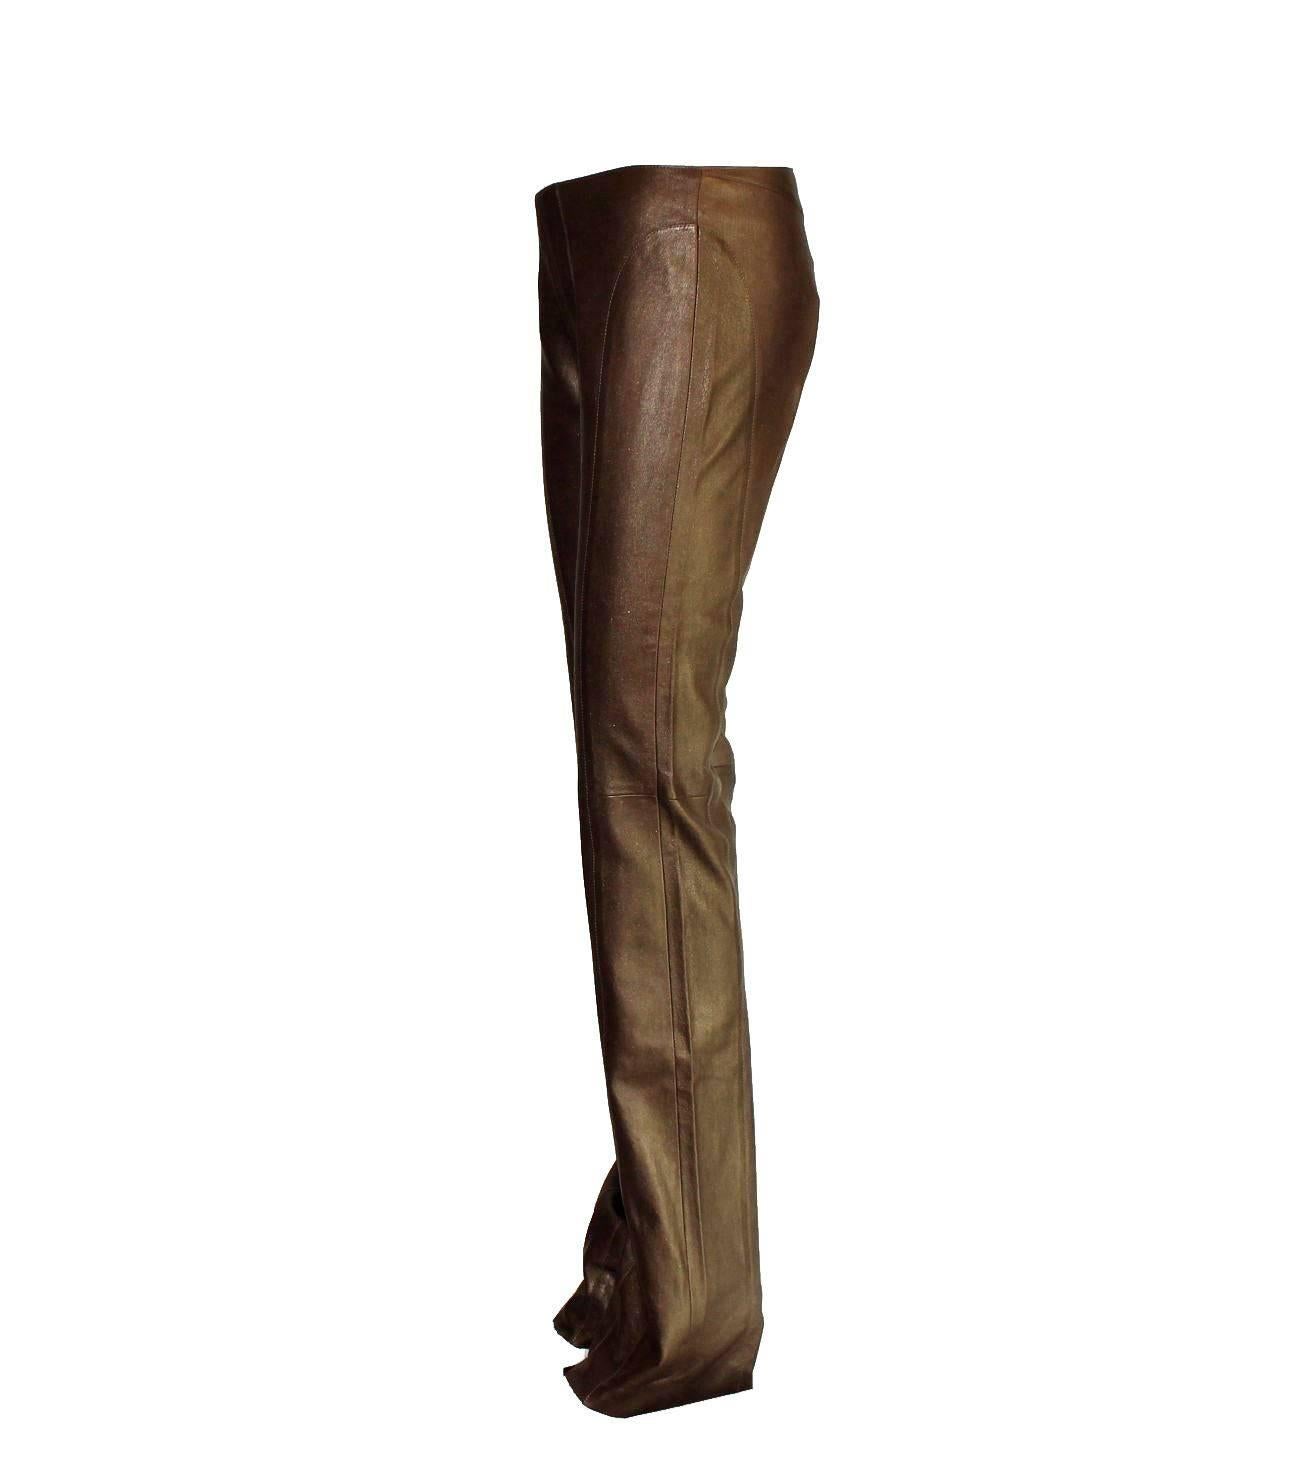 This Jitrois basic pants features a smooth finish of flexible stretch lambskin
Beautiful metallic leather that fits like a glove on your body
Classic cut with zip in the back
Long unhemmed legs
Made in France
Special Dry Clean Only
Size 38
New with